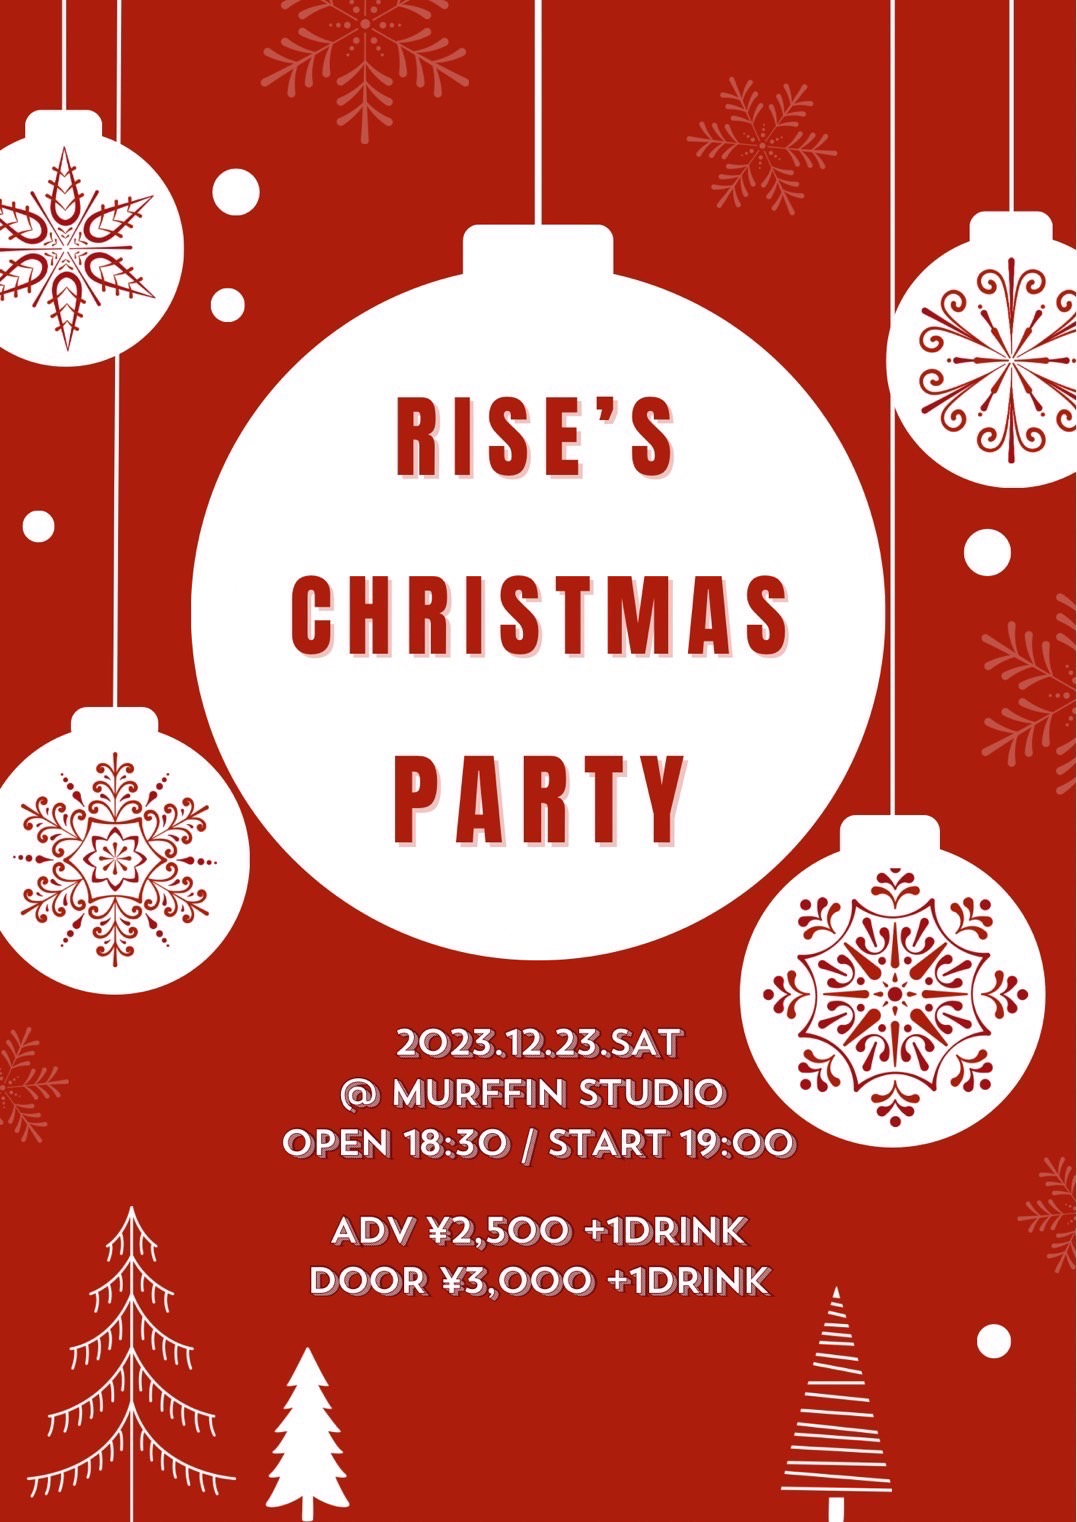 『Rise's CHRISTMAS PARTY』